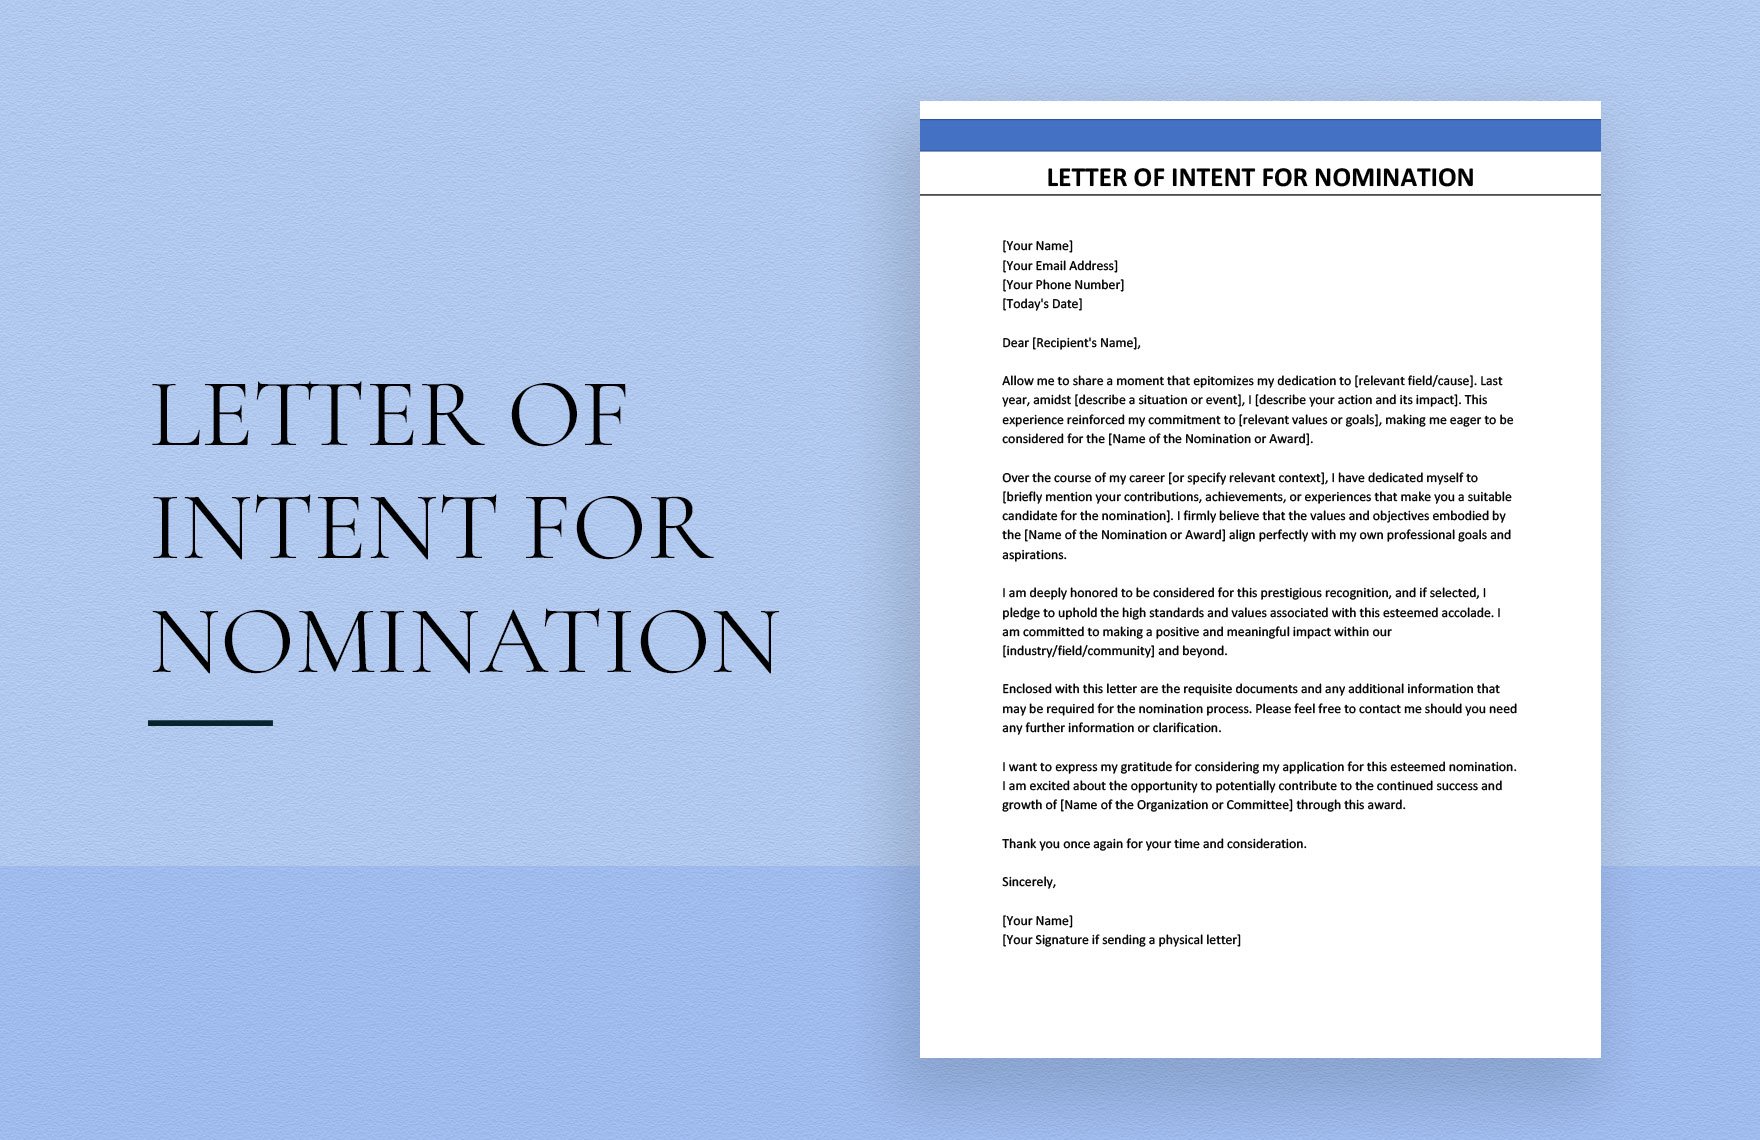 Letter of Intent for Nomination